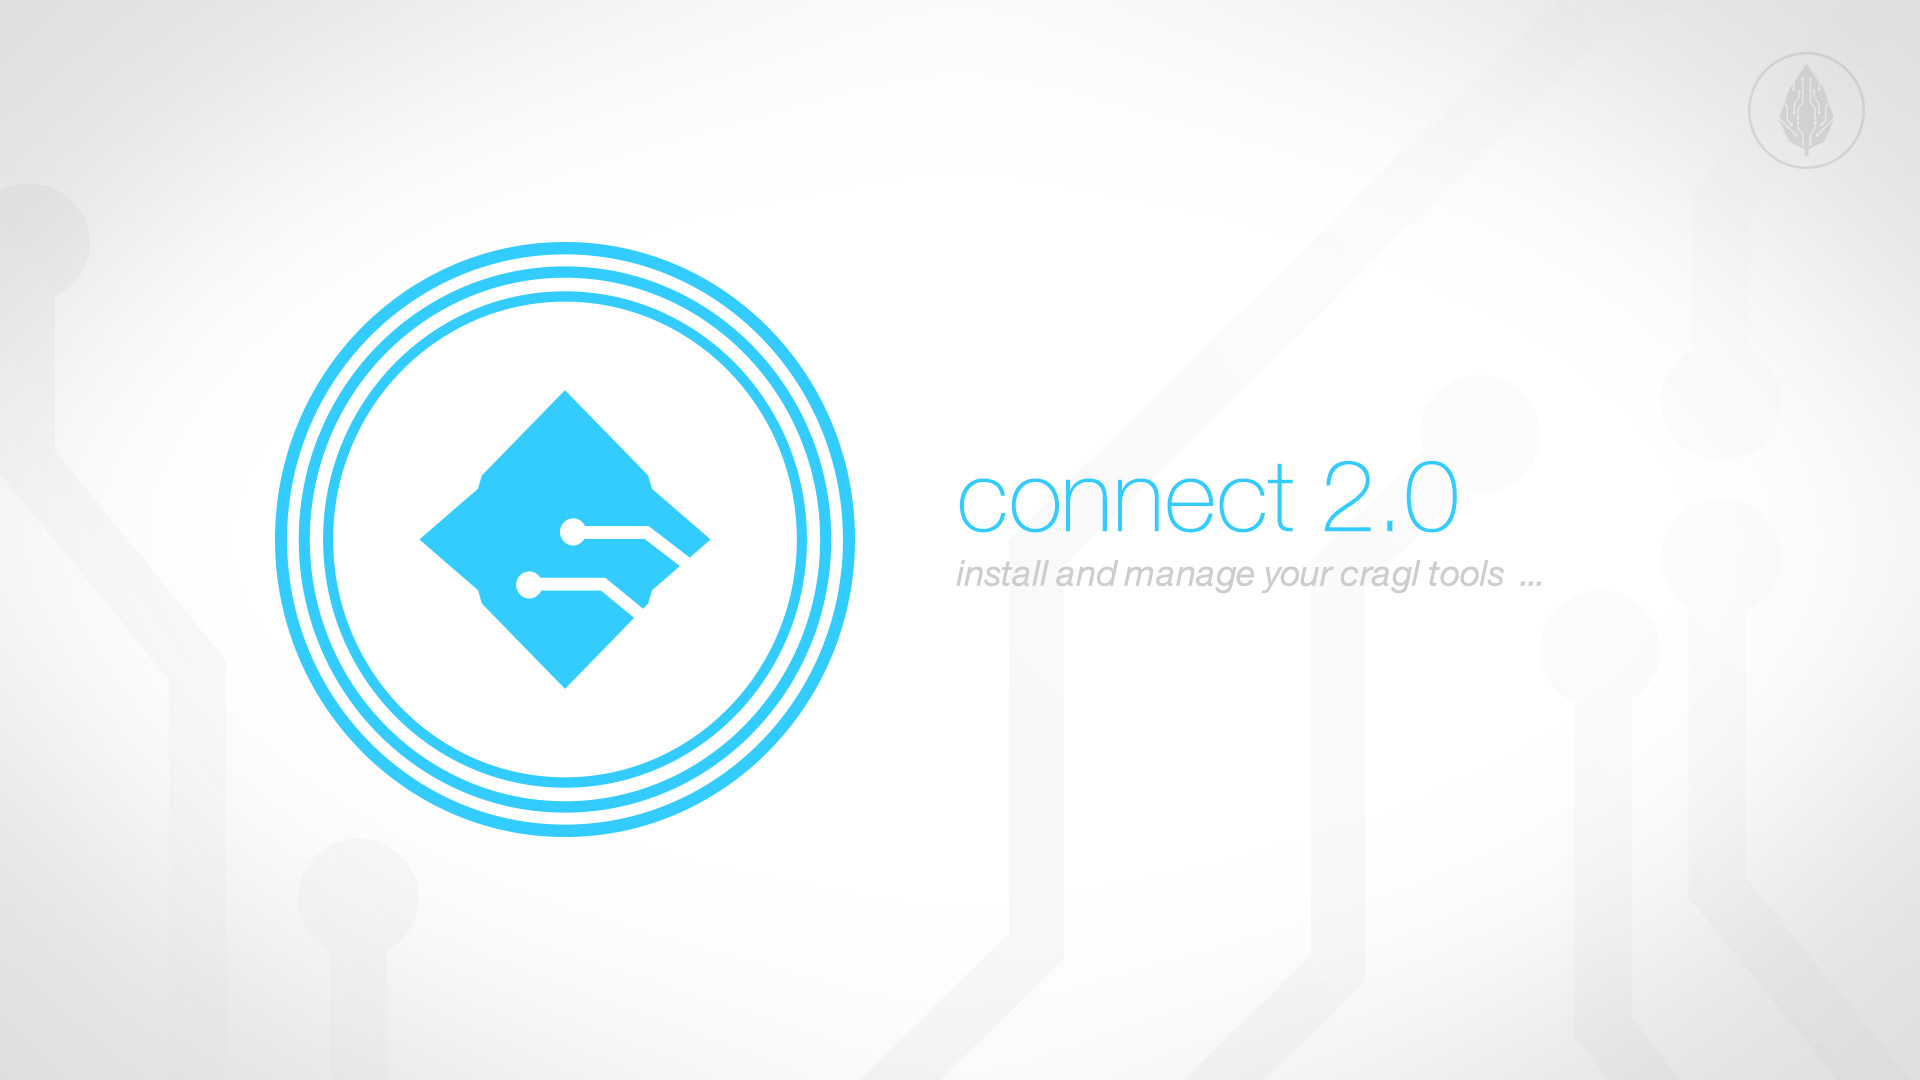 Published connect 2.0